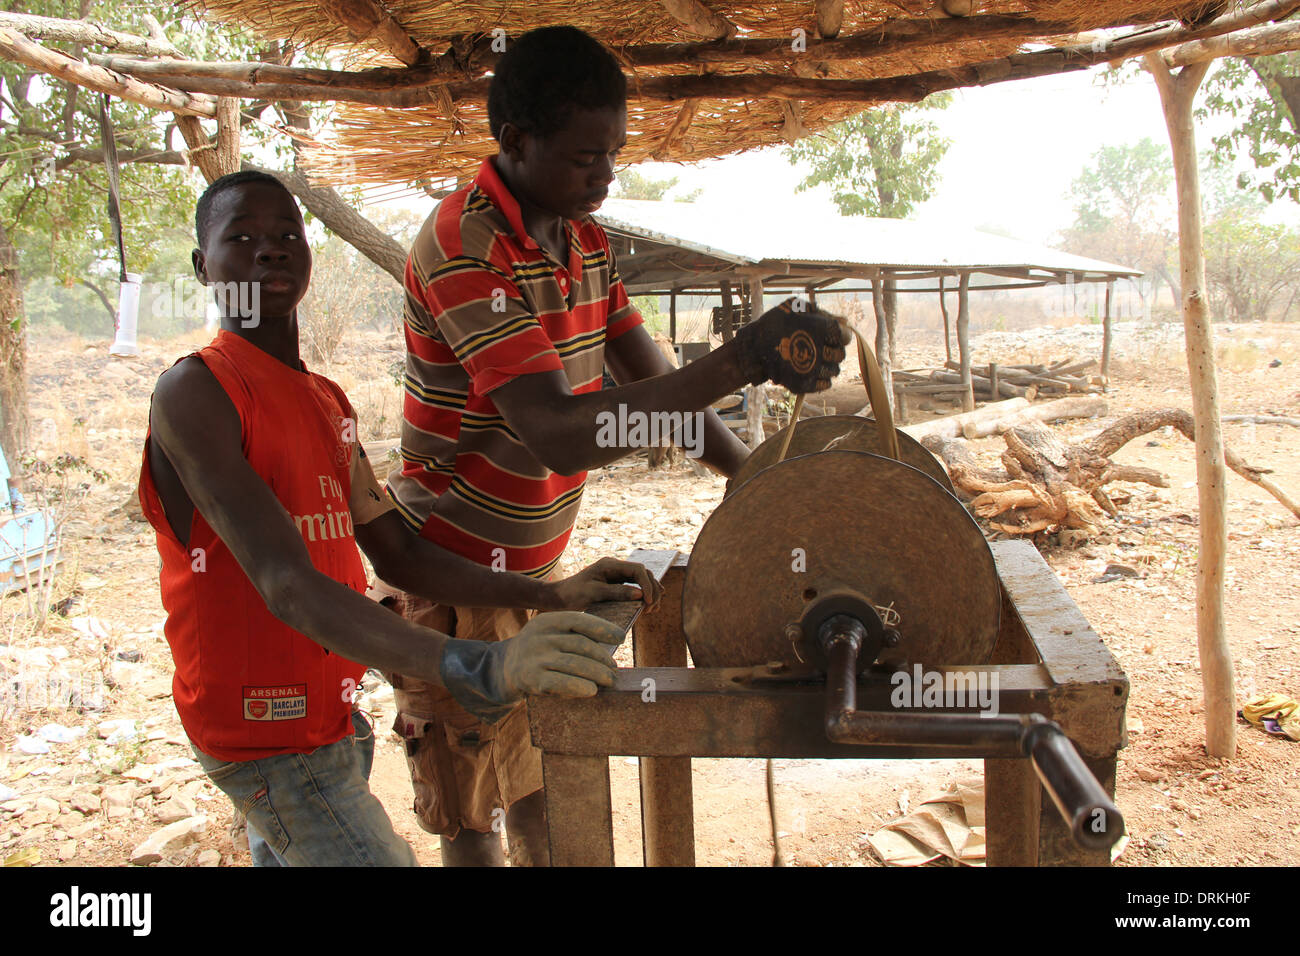 Two young men working a lathe in village workshop, Ghana Stock Photo